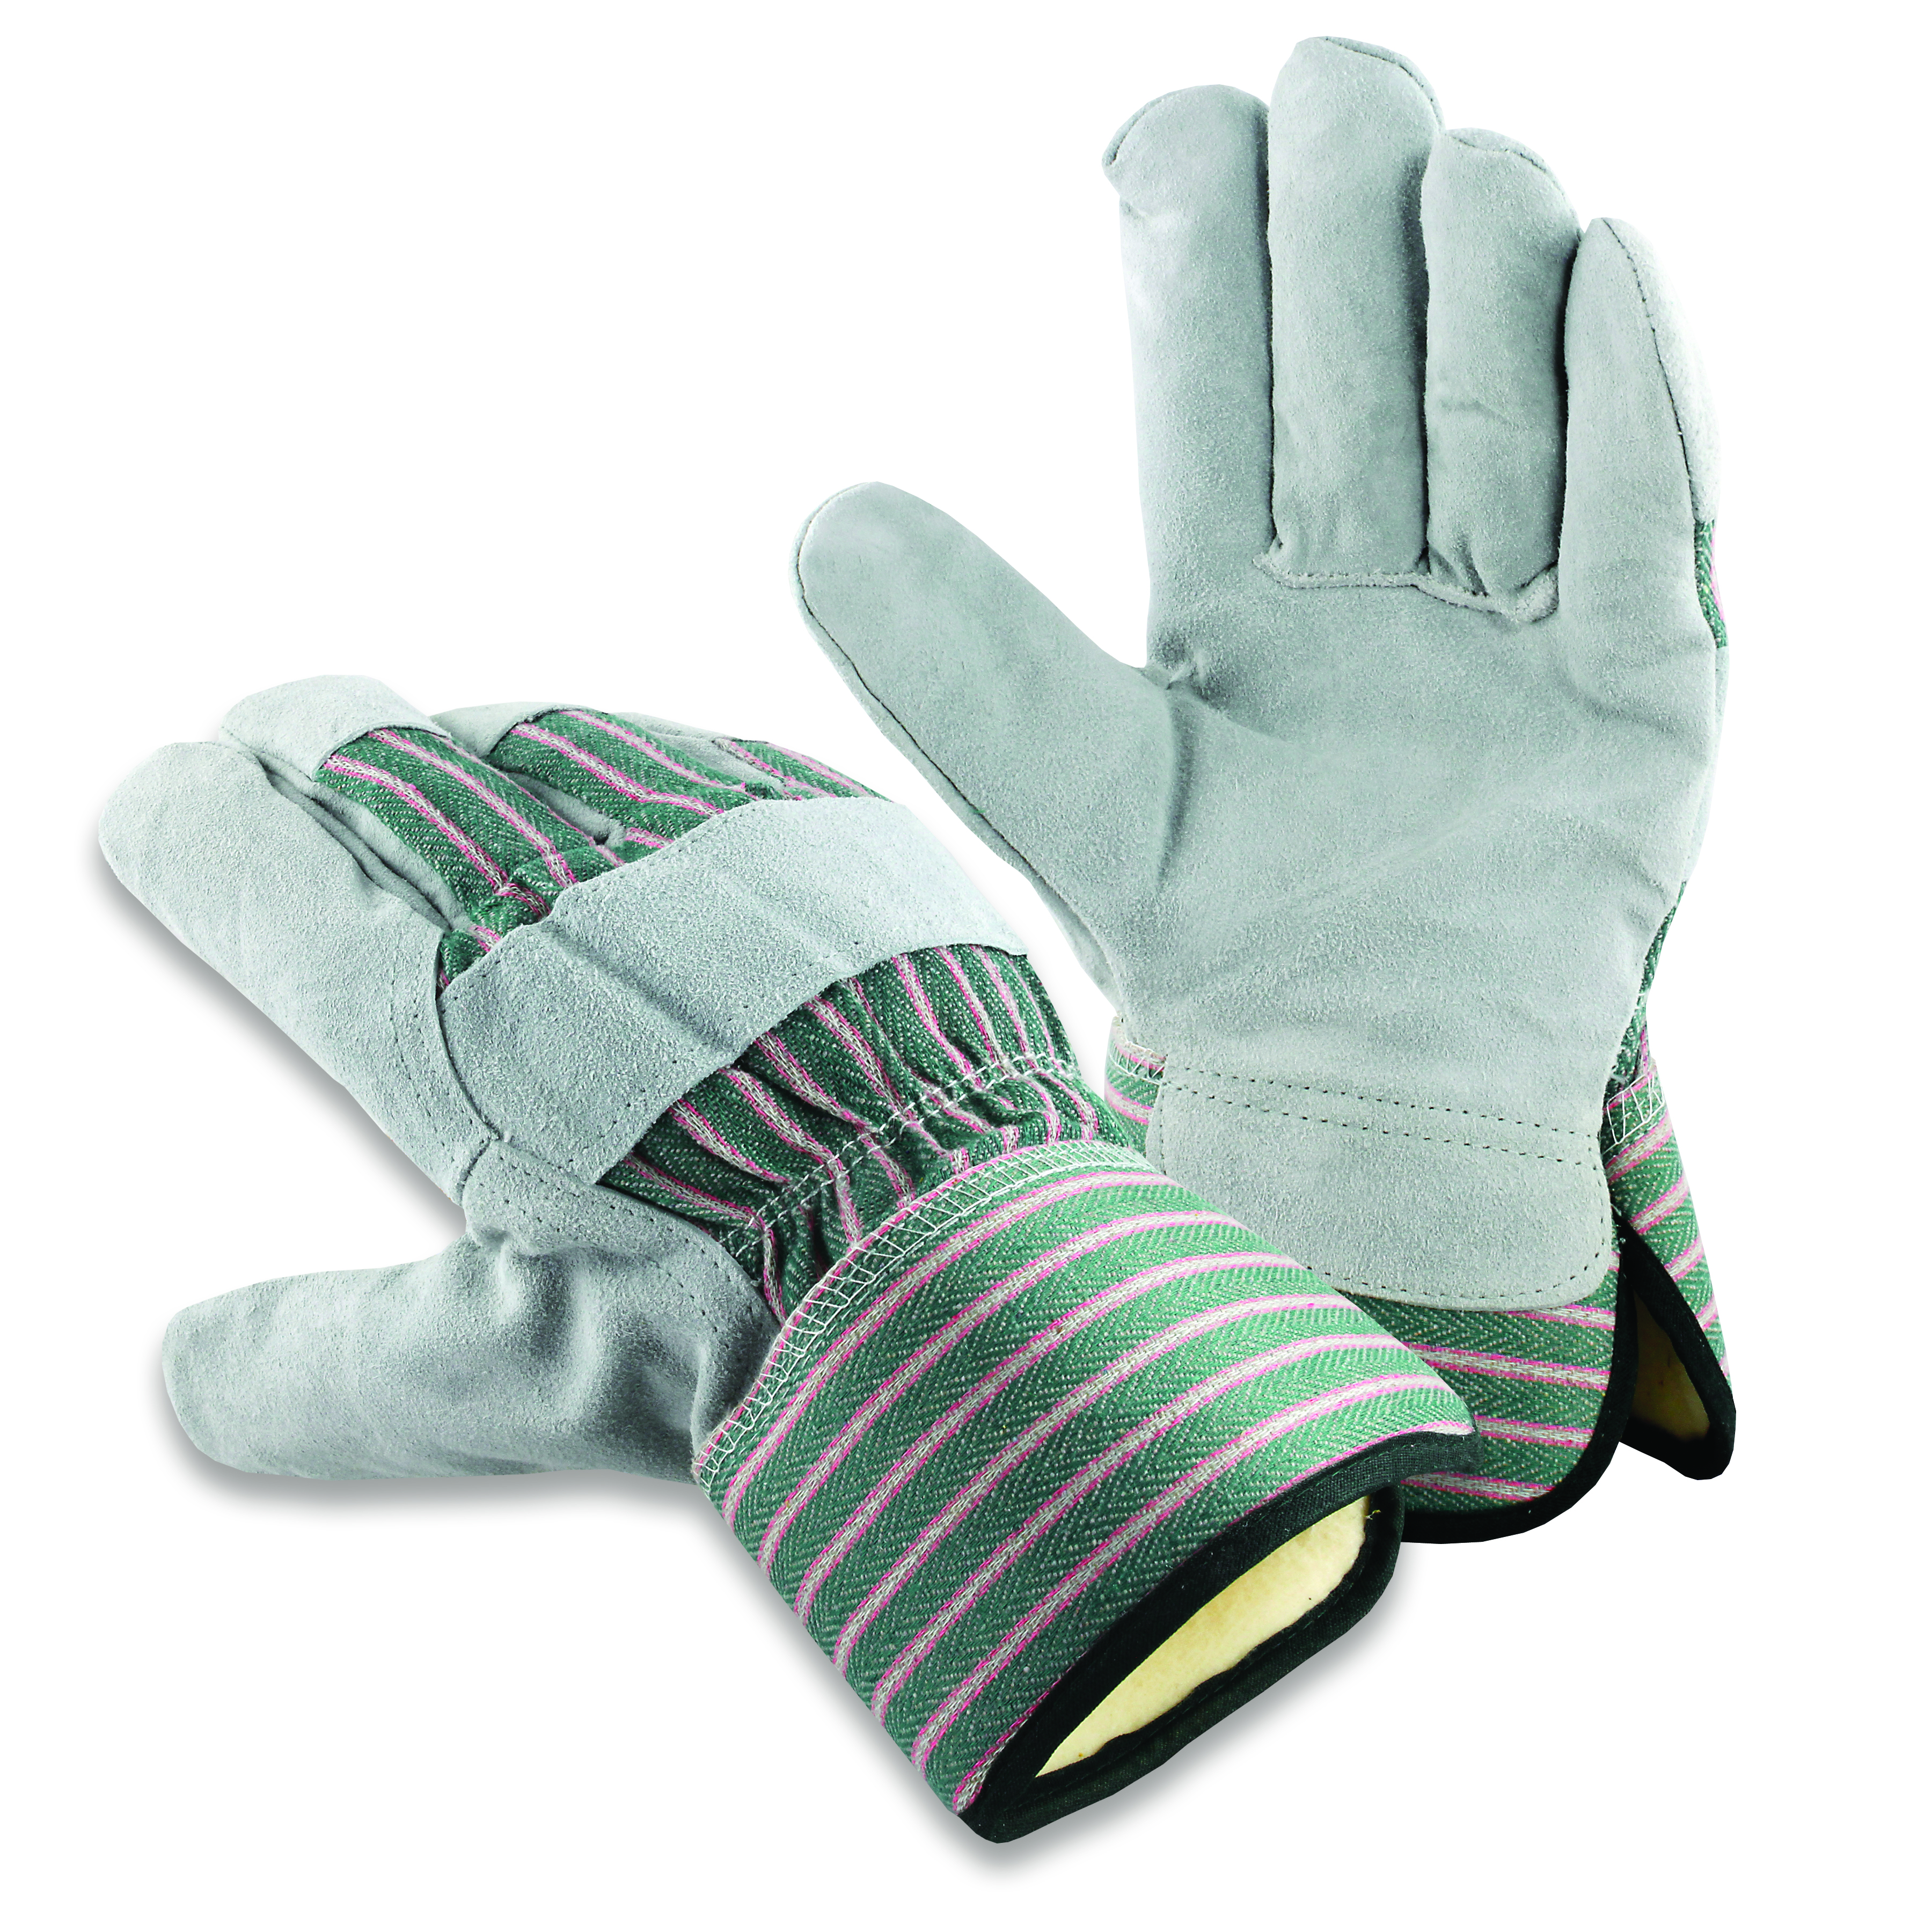 Leather Palm Gloves, Thermal Insulation, Safety Cuff